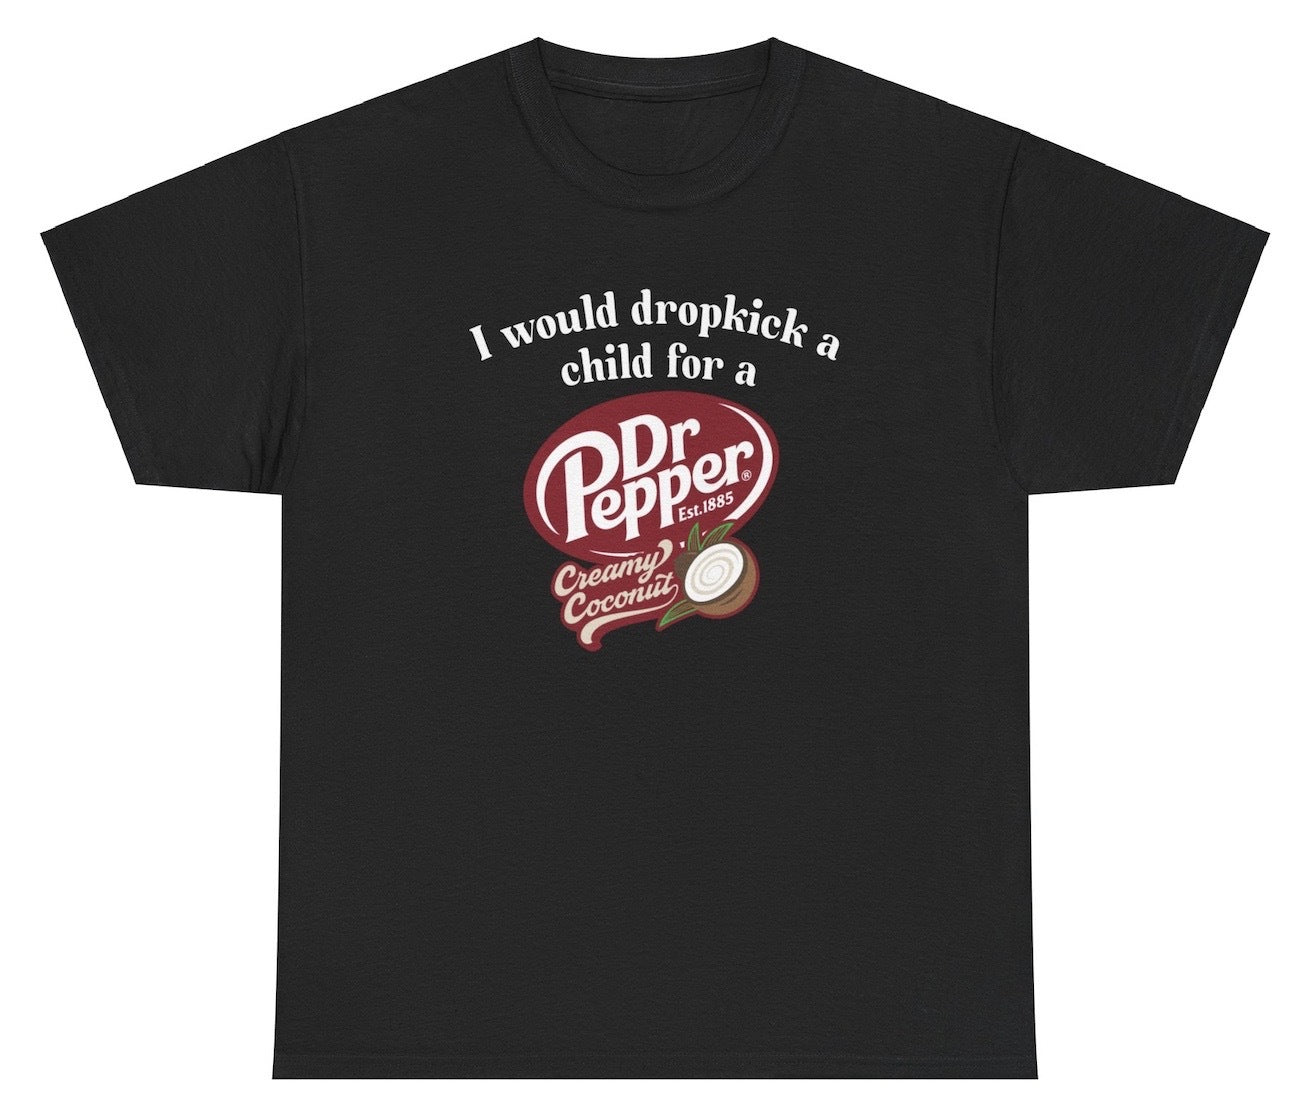 *NEW* I Would Dropkick A Child For A Dr Pepper Creamy Coconut Tee